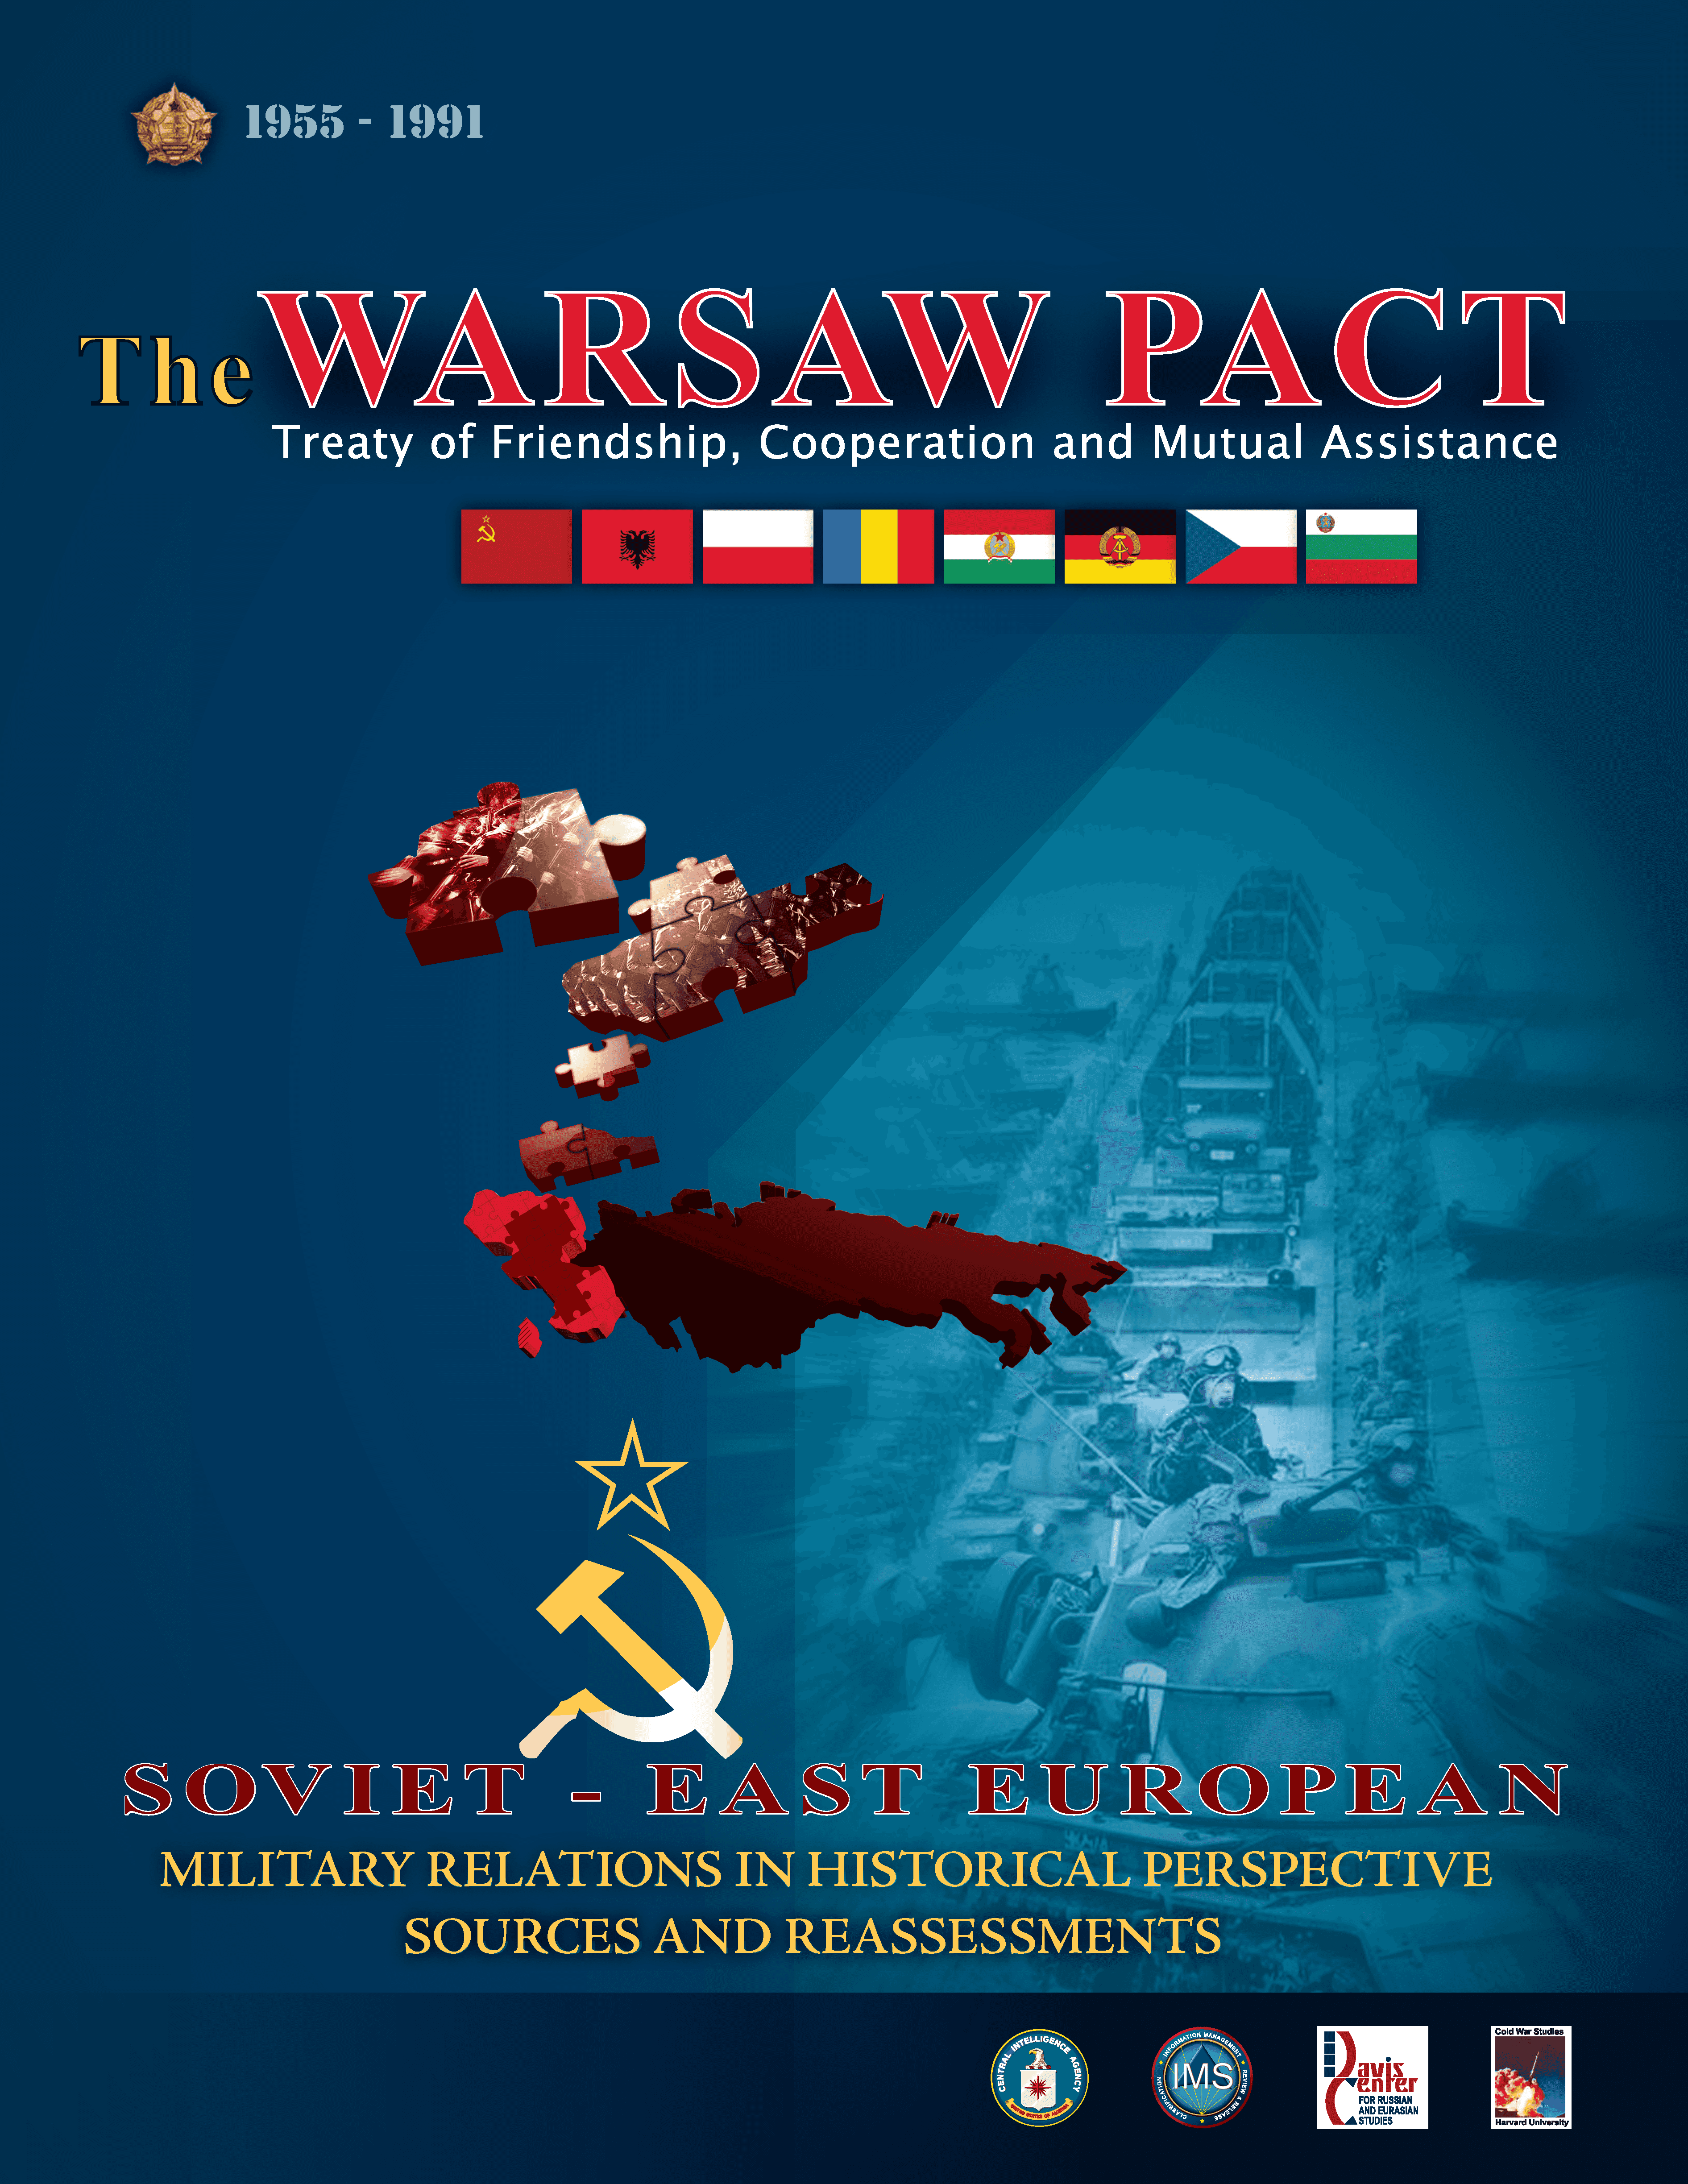 Cover page for the document The Warsaw Pact: Treaty of Friendship, Cooperation and Mutual Assistance.